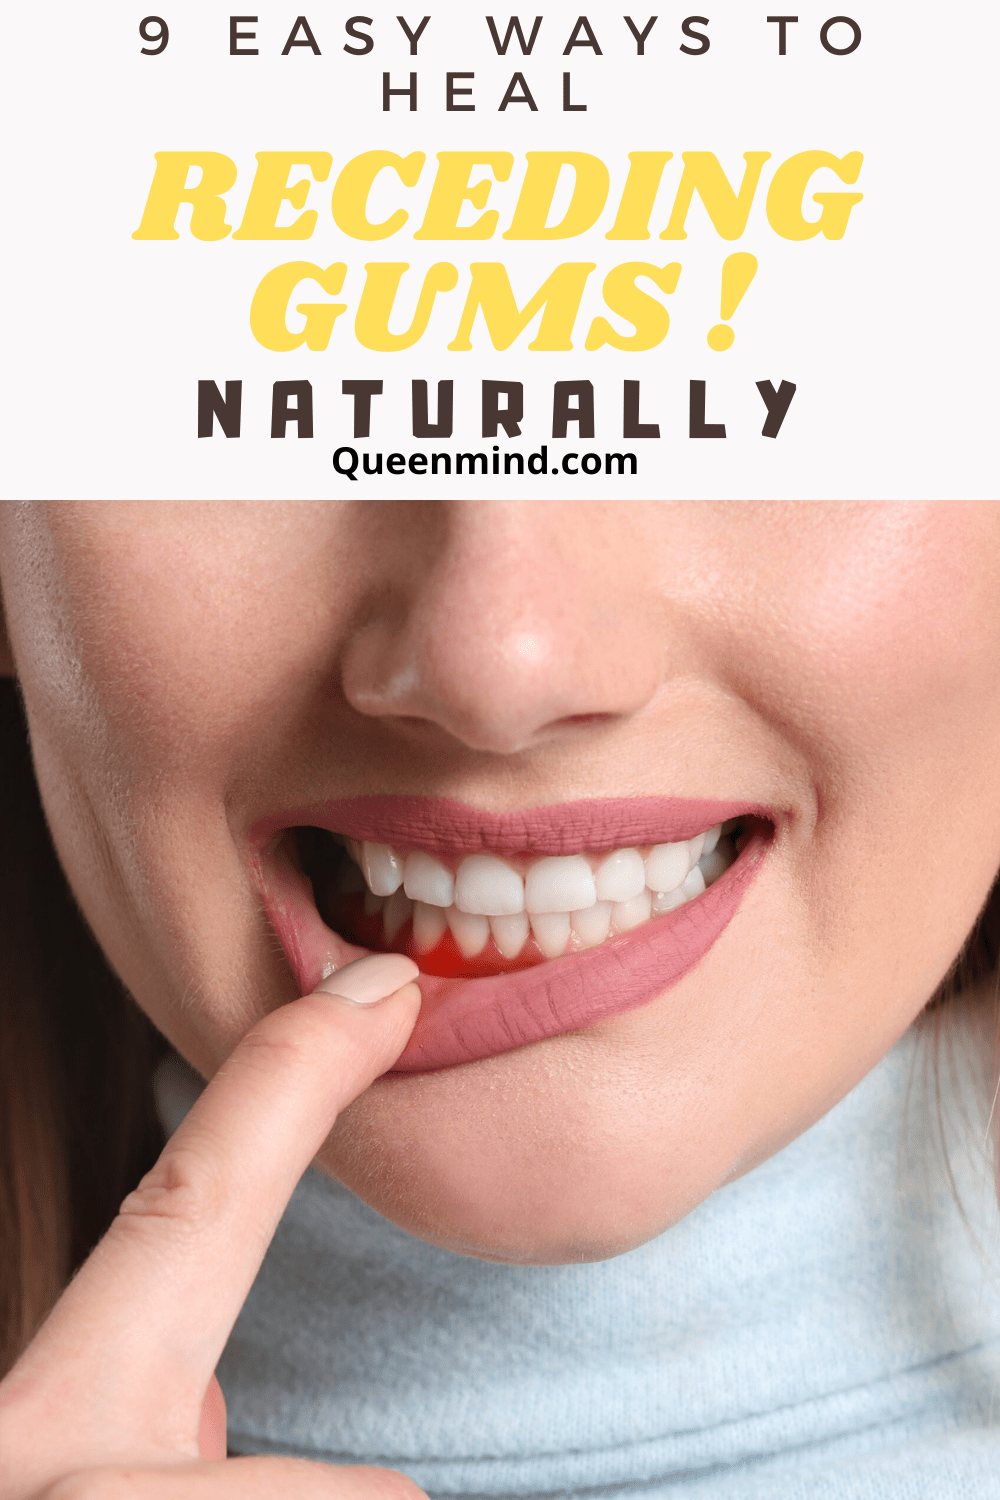 9 Easy Ways to Heal Receding Gums Naturally!